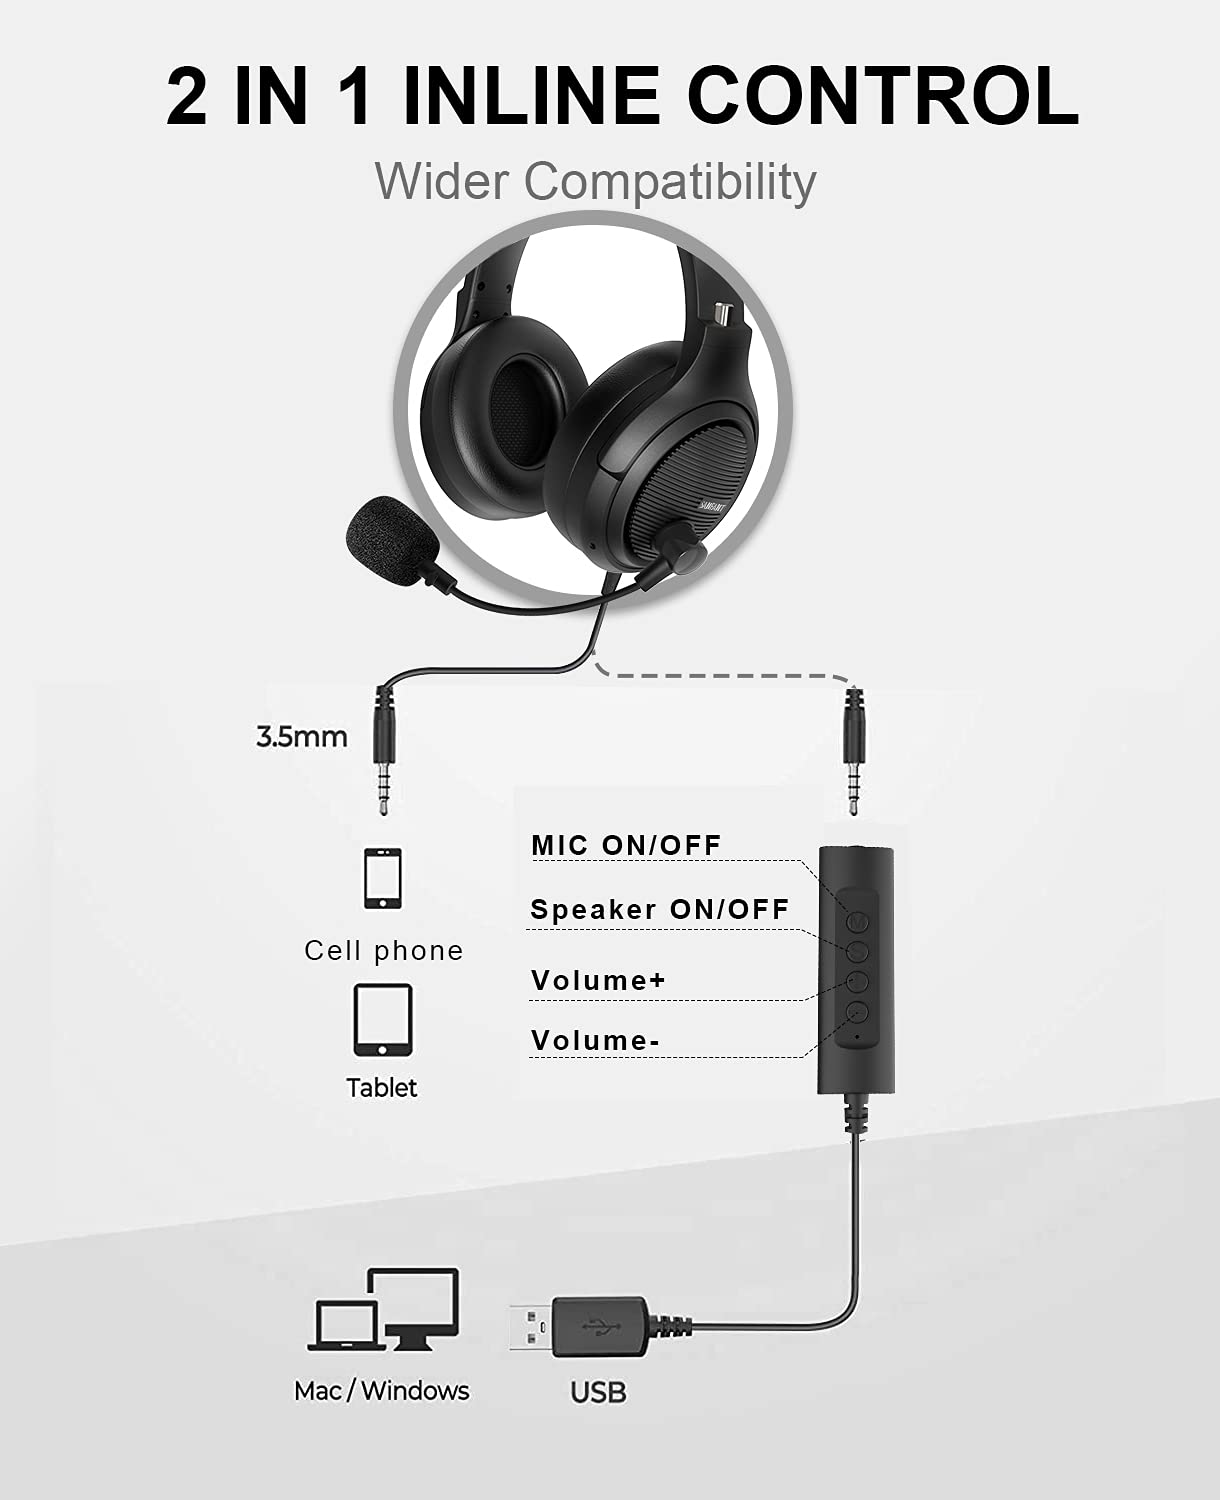 USB Headset/3.5mm PC Headphones with Microphone Noise Cancelling, Flexible Over-Ear Earcups and Rotatable Boom Mic, Wired Computer Headset, Comfort Office Headset for Laptop/Call Center/Cell Phone